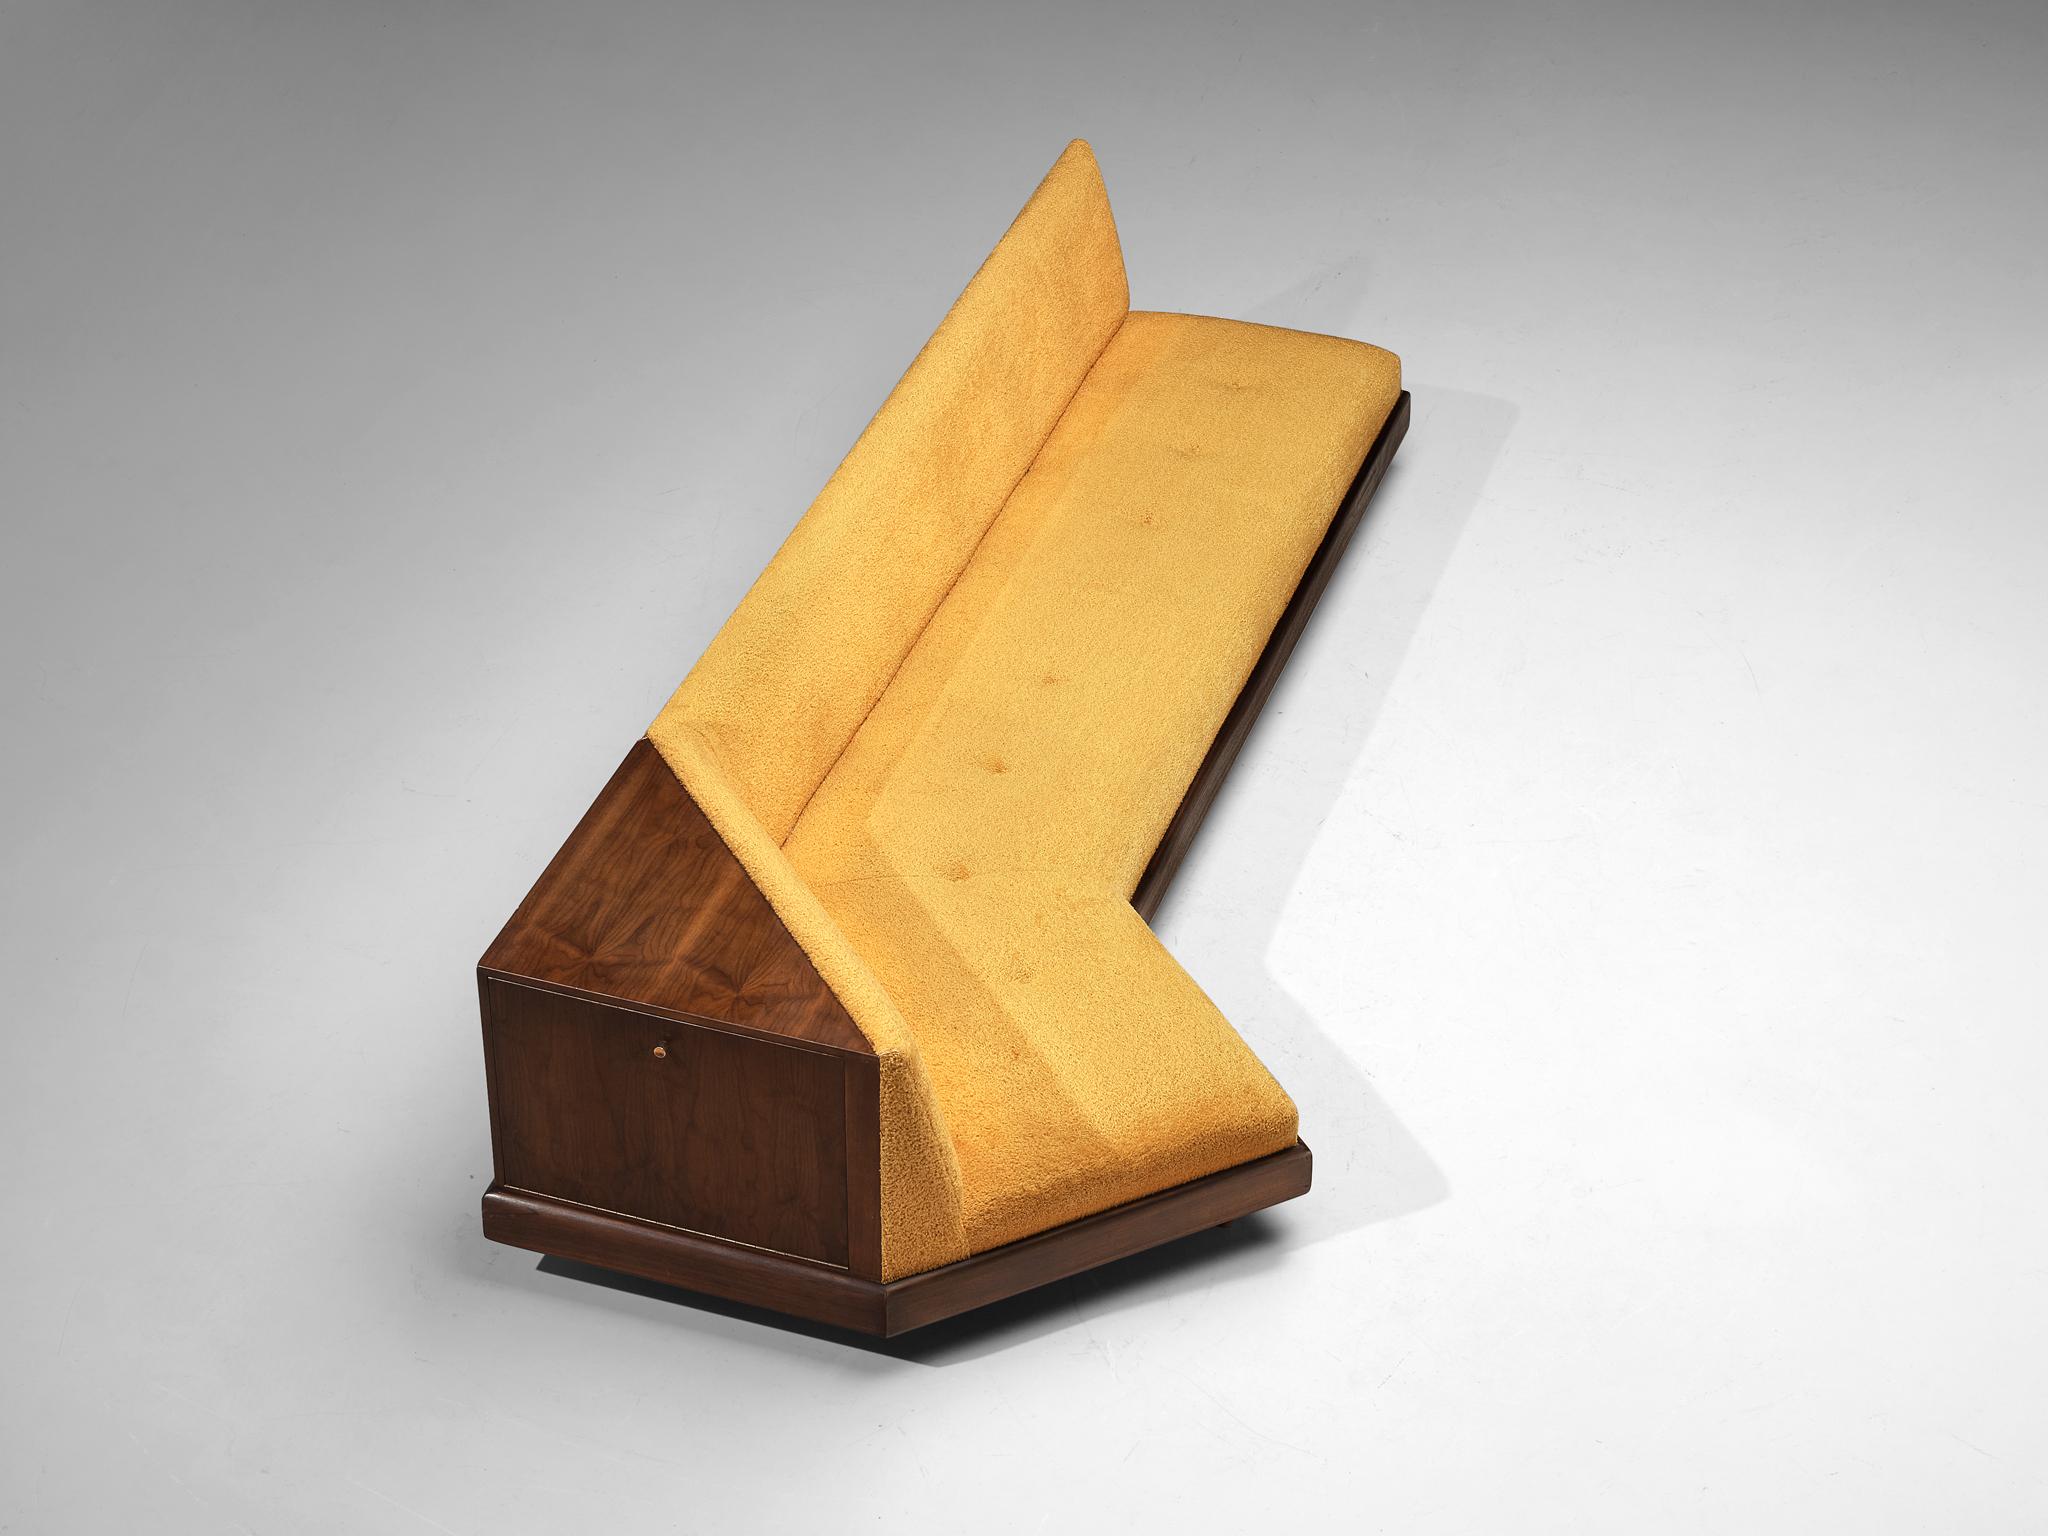 Adrian Pearsall, sofa, model '2167S', fabric, walnut, United States, 1960s

Beautiful sofa designed by Adrian Pearsall in the 1960s. This classic, soft shaped sofa has a distinctive feel and although it is modest and simplistic it also shows